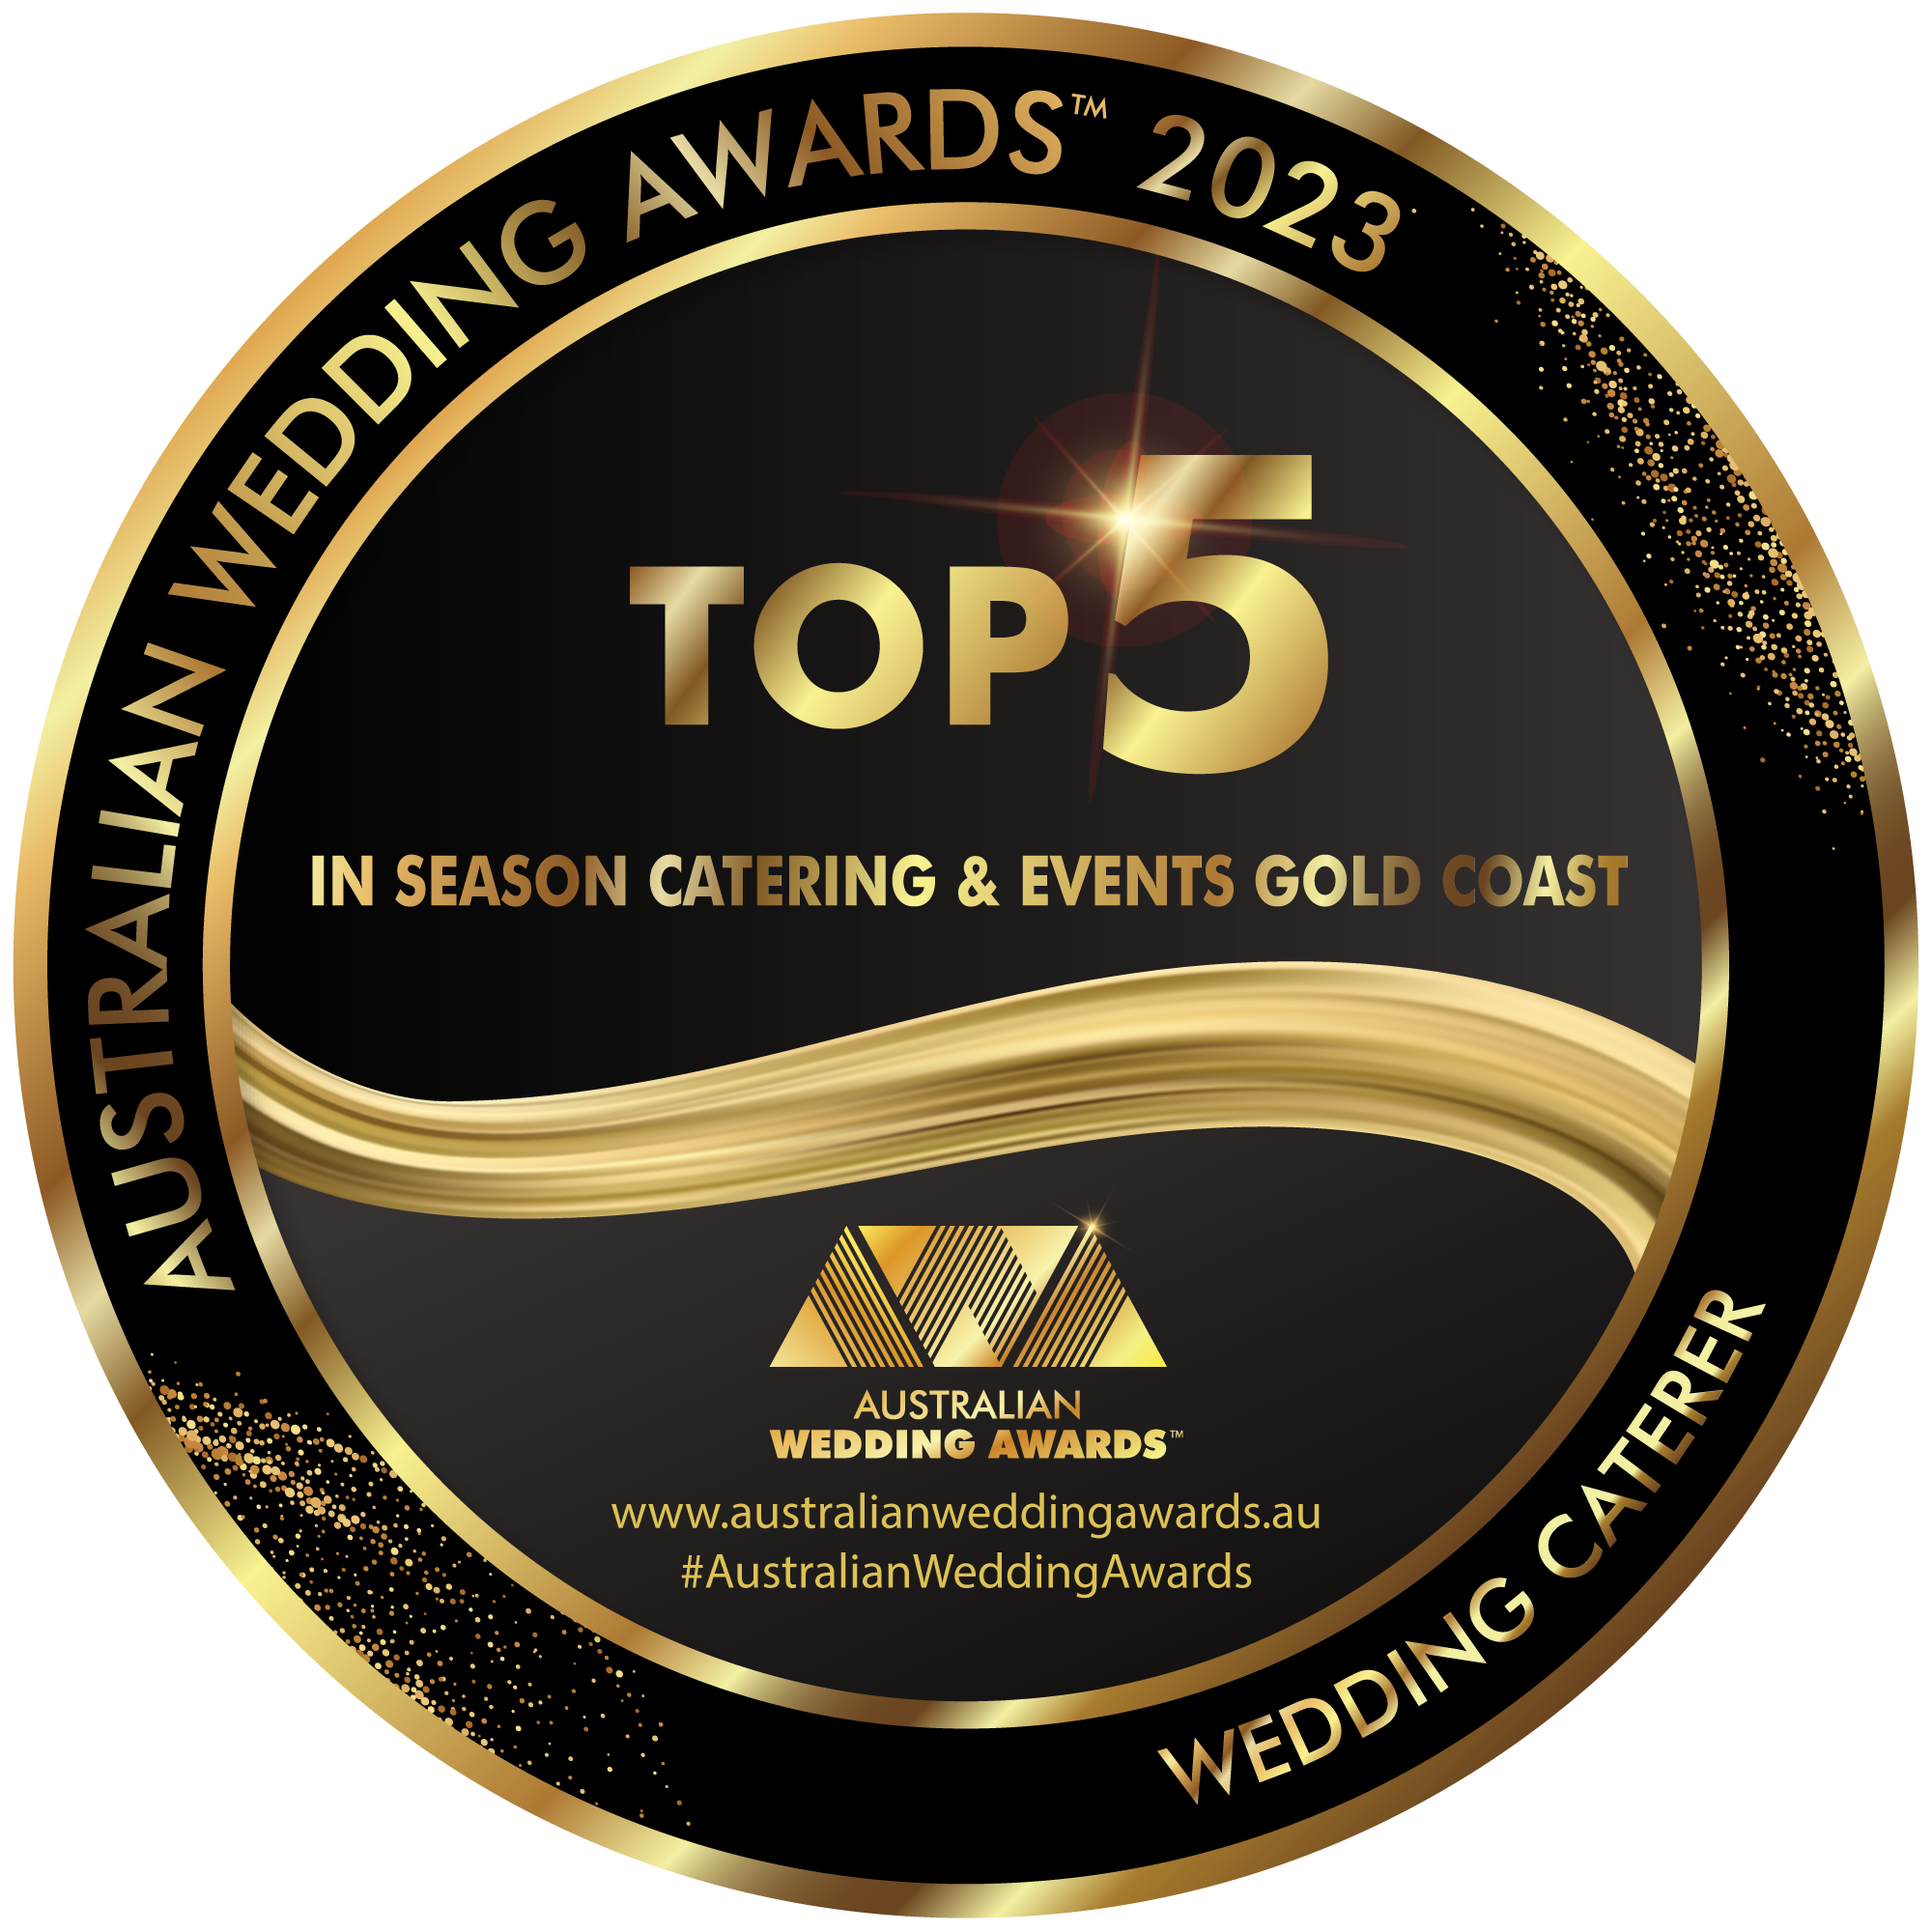 In-Season-Catering-&-Events-Gold-Coast_AWA2023-TOP5.png